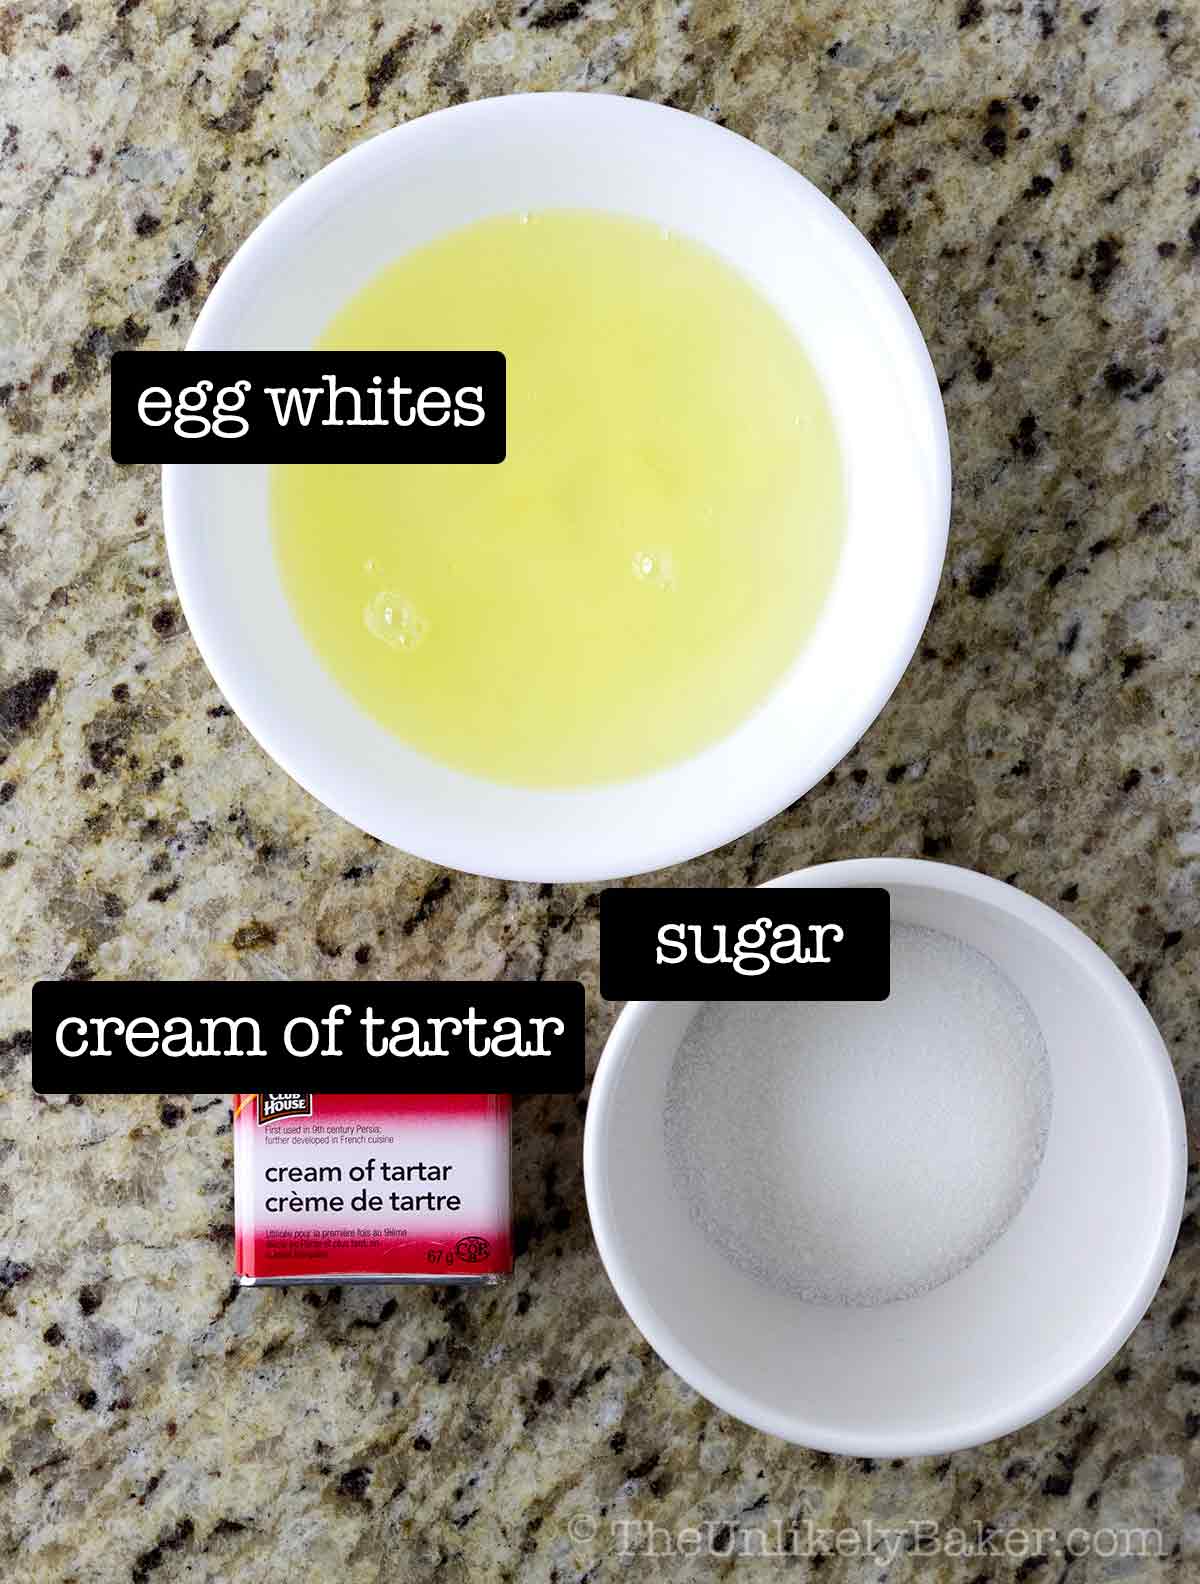 Ingredients for meringue with text overlay.